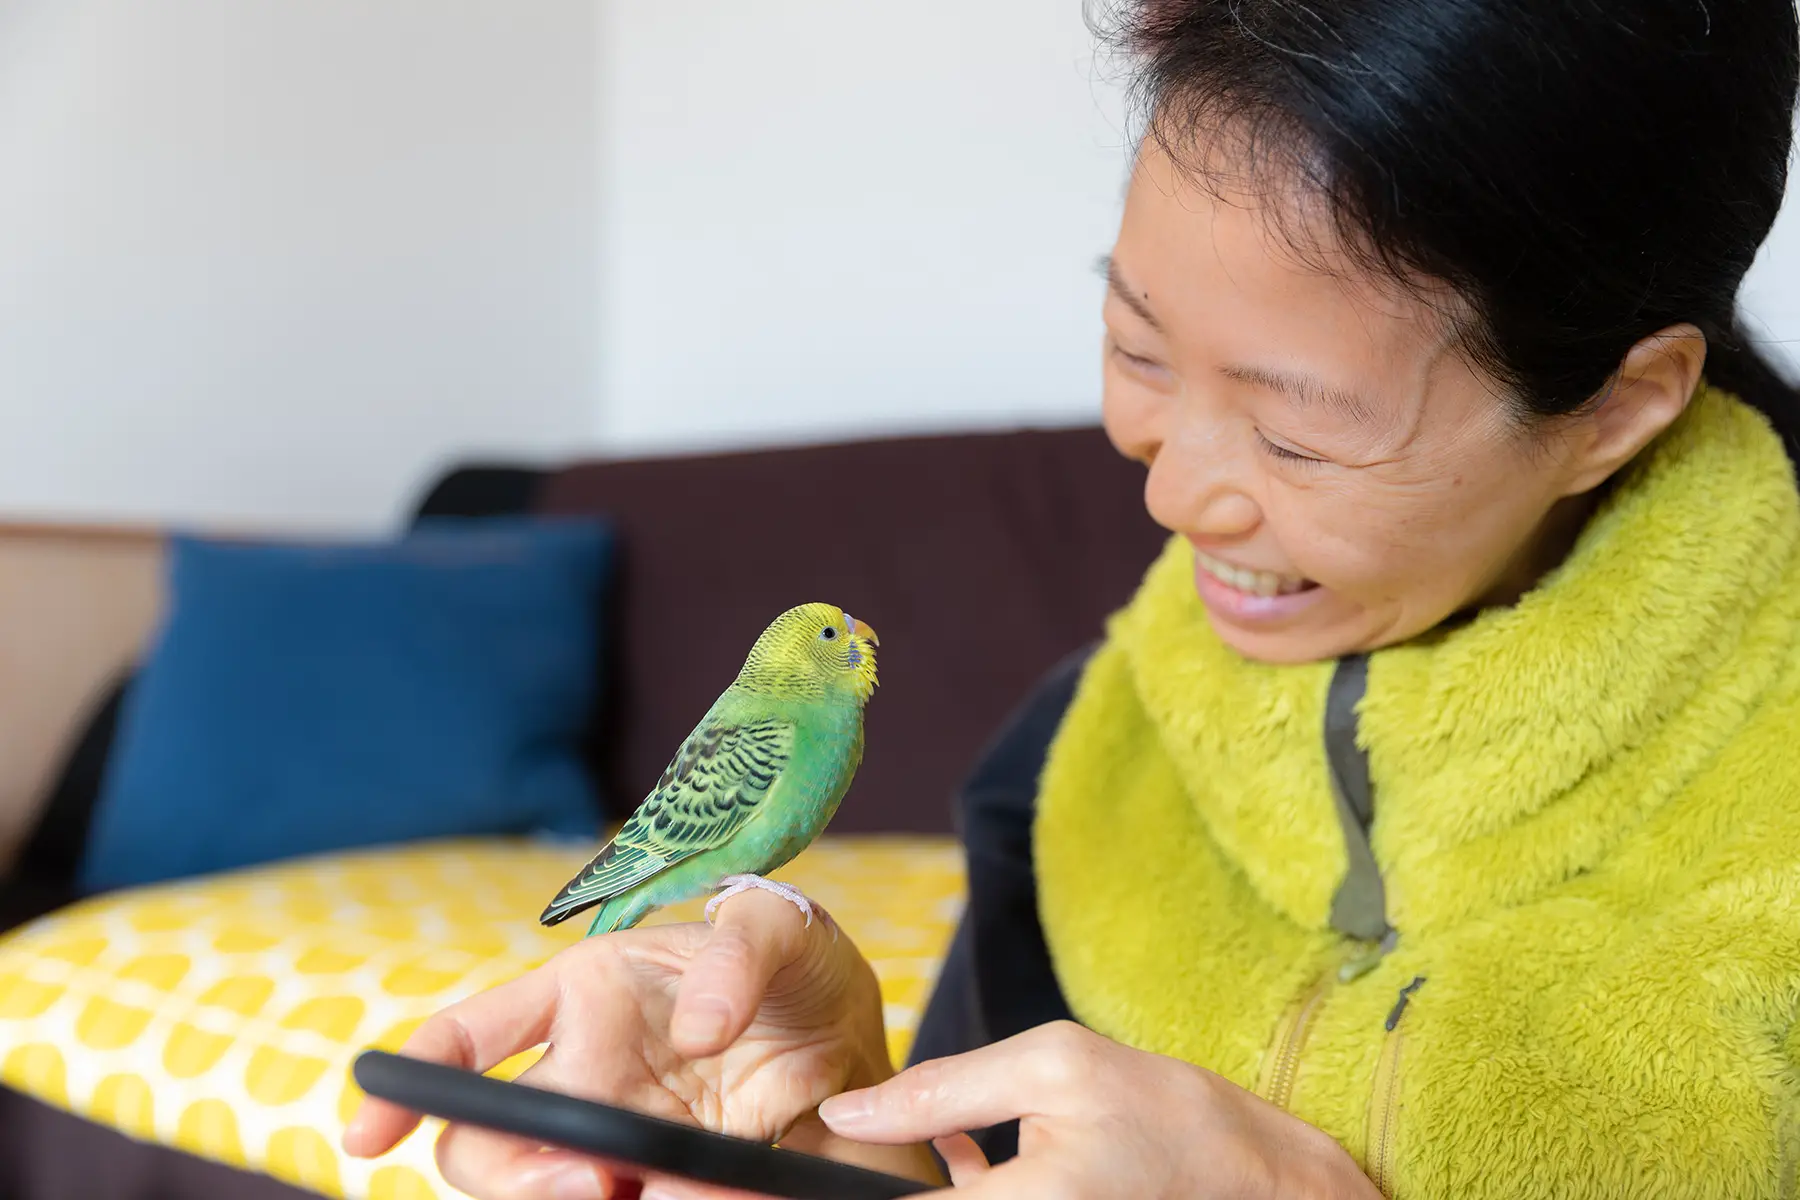 A woman using a phone, smiling at her pet parakeet which is sitting on her hand